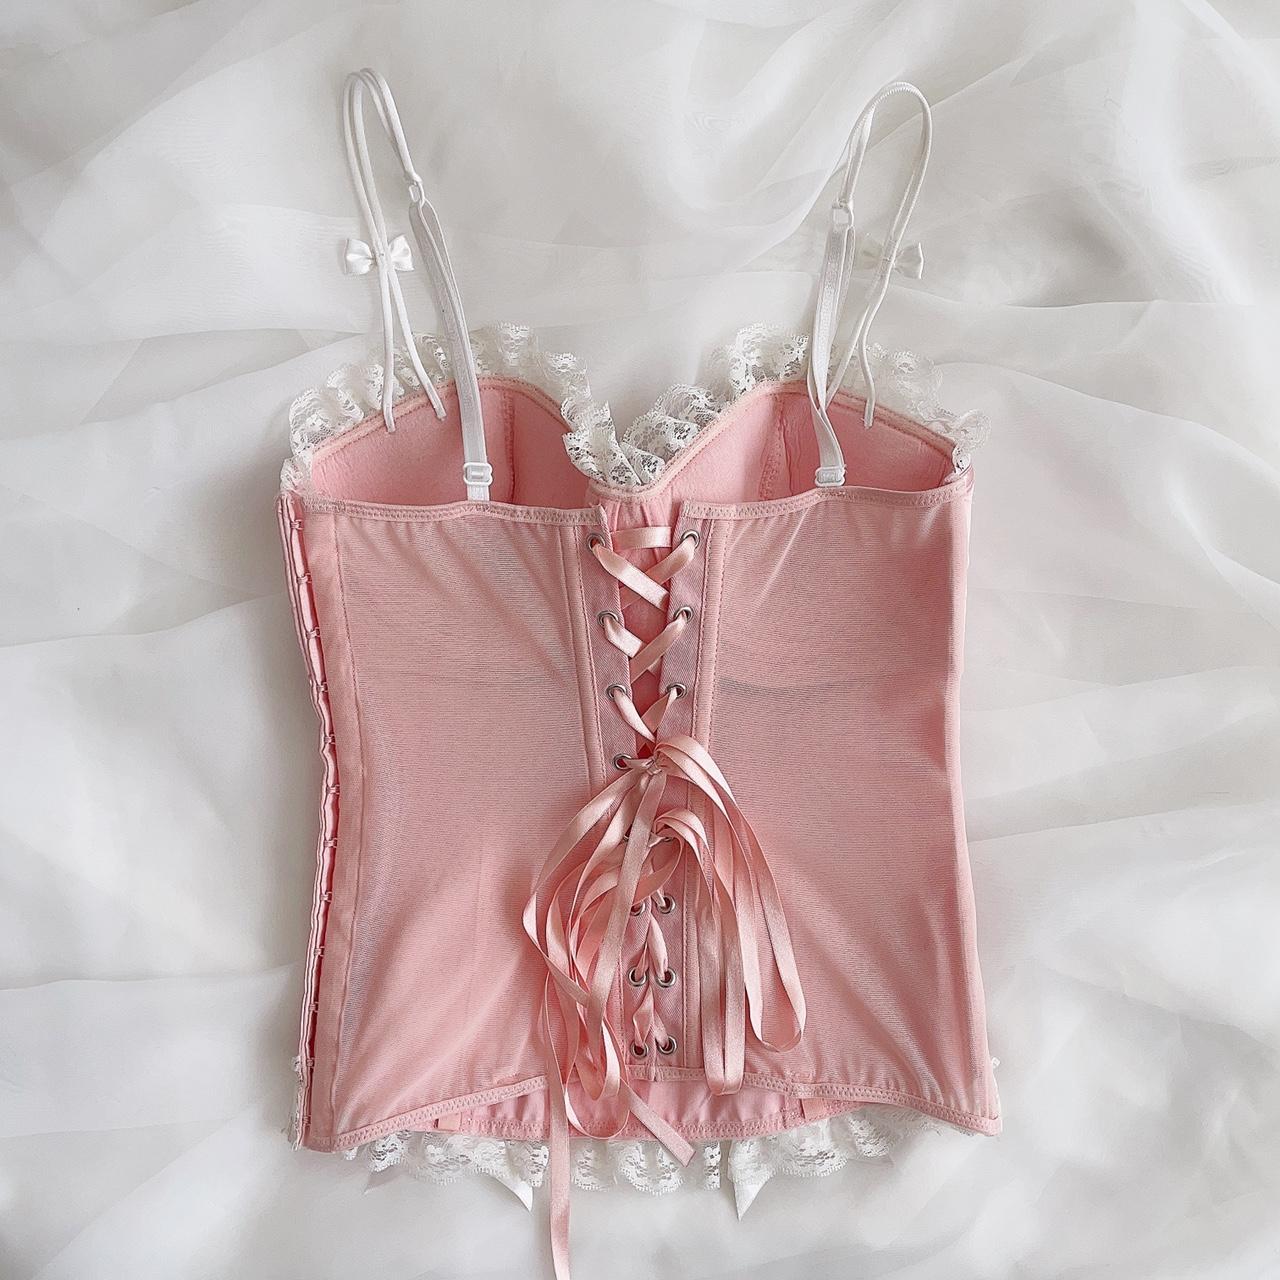 Women's Pink and White Corset | Depop